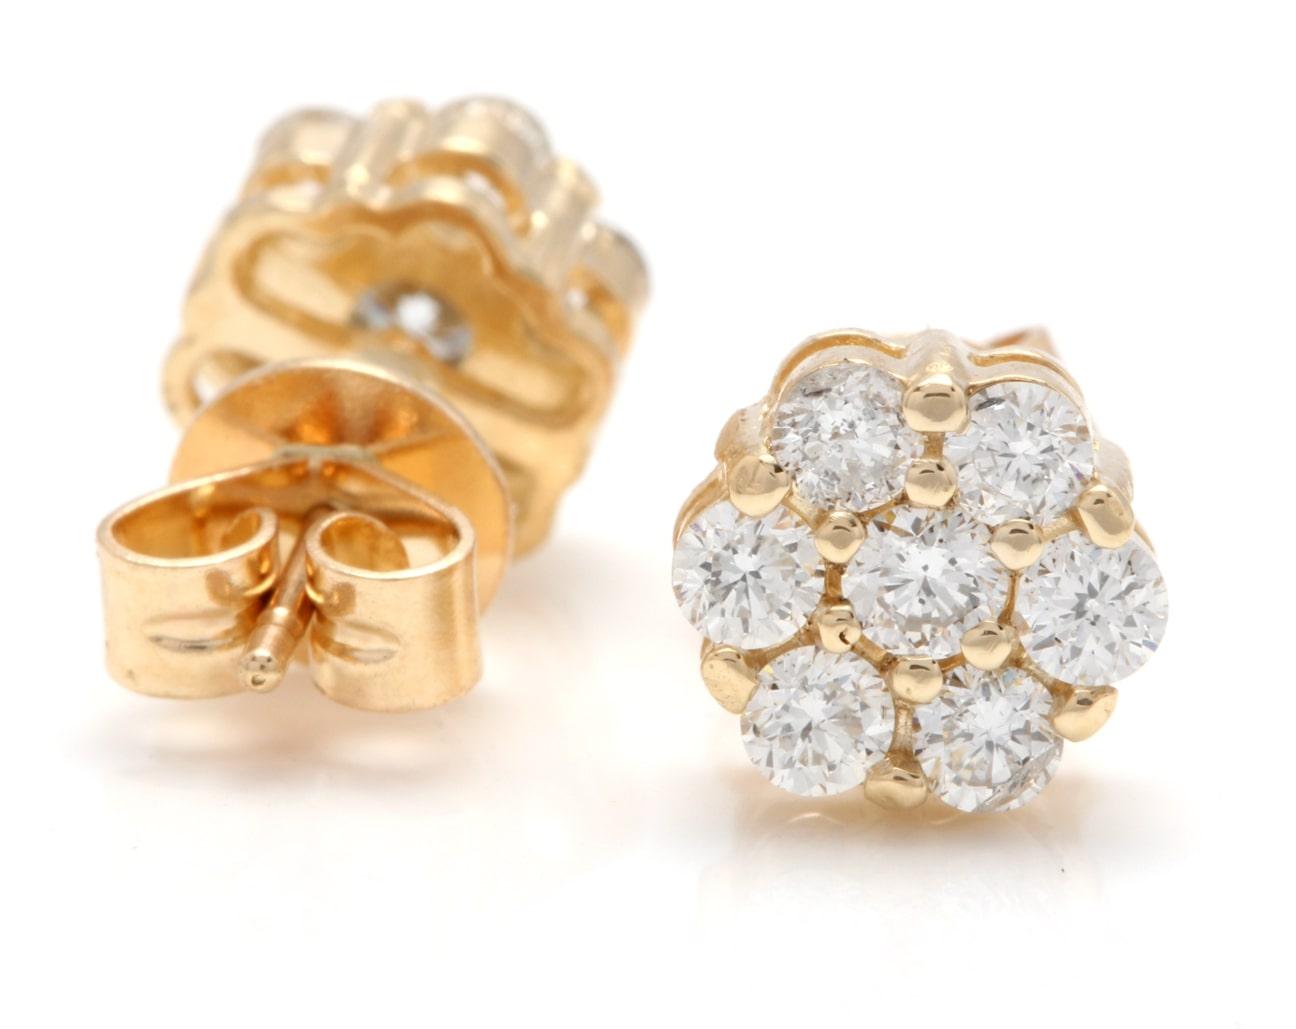 Exquisite 0.90 Carats Natural Diamond 14K Solid Yellow Gold Stud Earrings

Amazing looking piece!

Total Natural Round Cut Diamonds Weight: Approx. 0.90 Carats (both earrings) SI1 / G-H

Diameter of the Earring is: 7.2mm

Total Earrings Weight is: